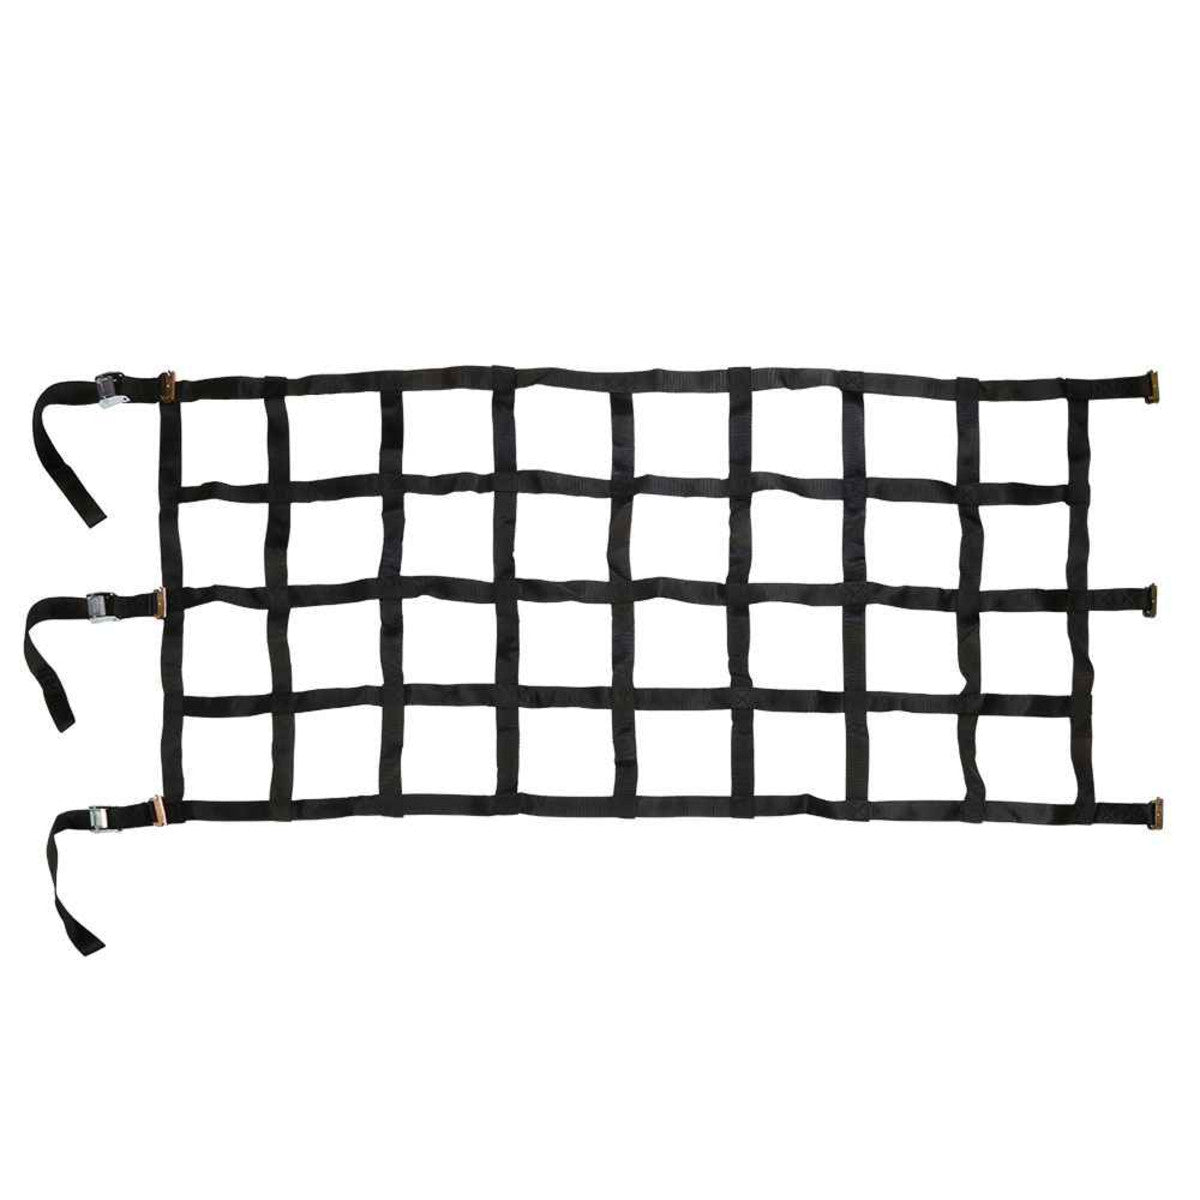 42" x  82" Heavy-Duty Cargo Net with Cam Buckles & E-Track Fittings